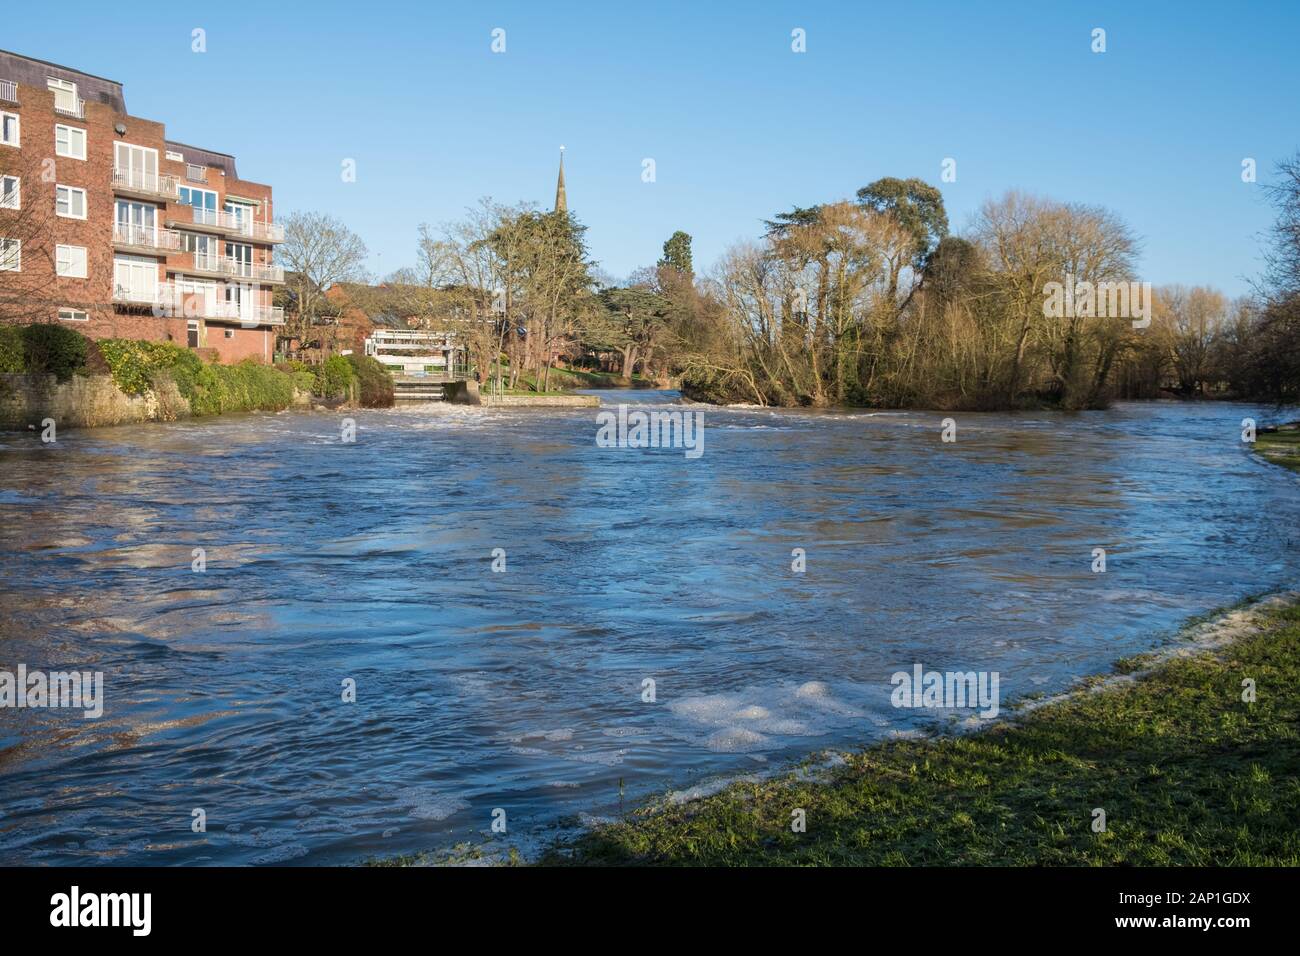 The River Avon at Lucy's Mill Weir in Stratford-upon-Avon, Warwickshire, Regno Unito Foto Stock